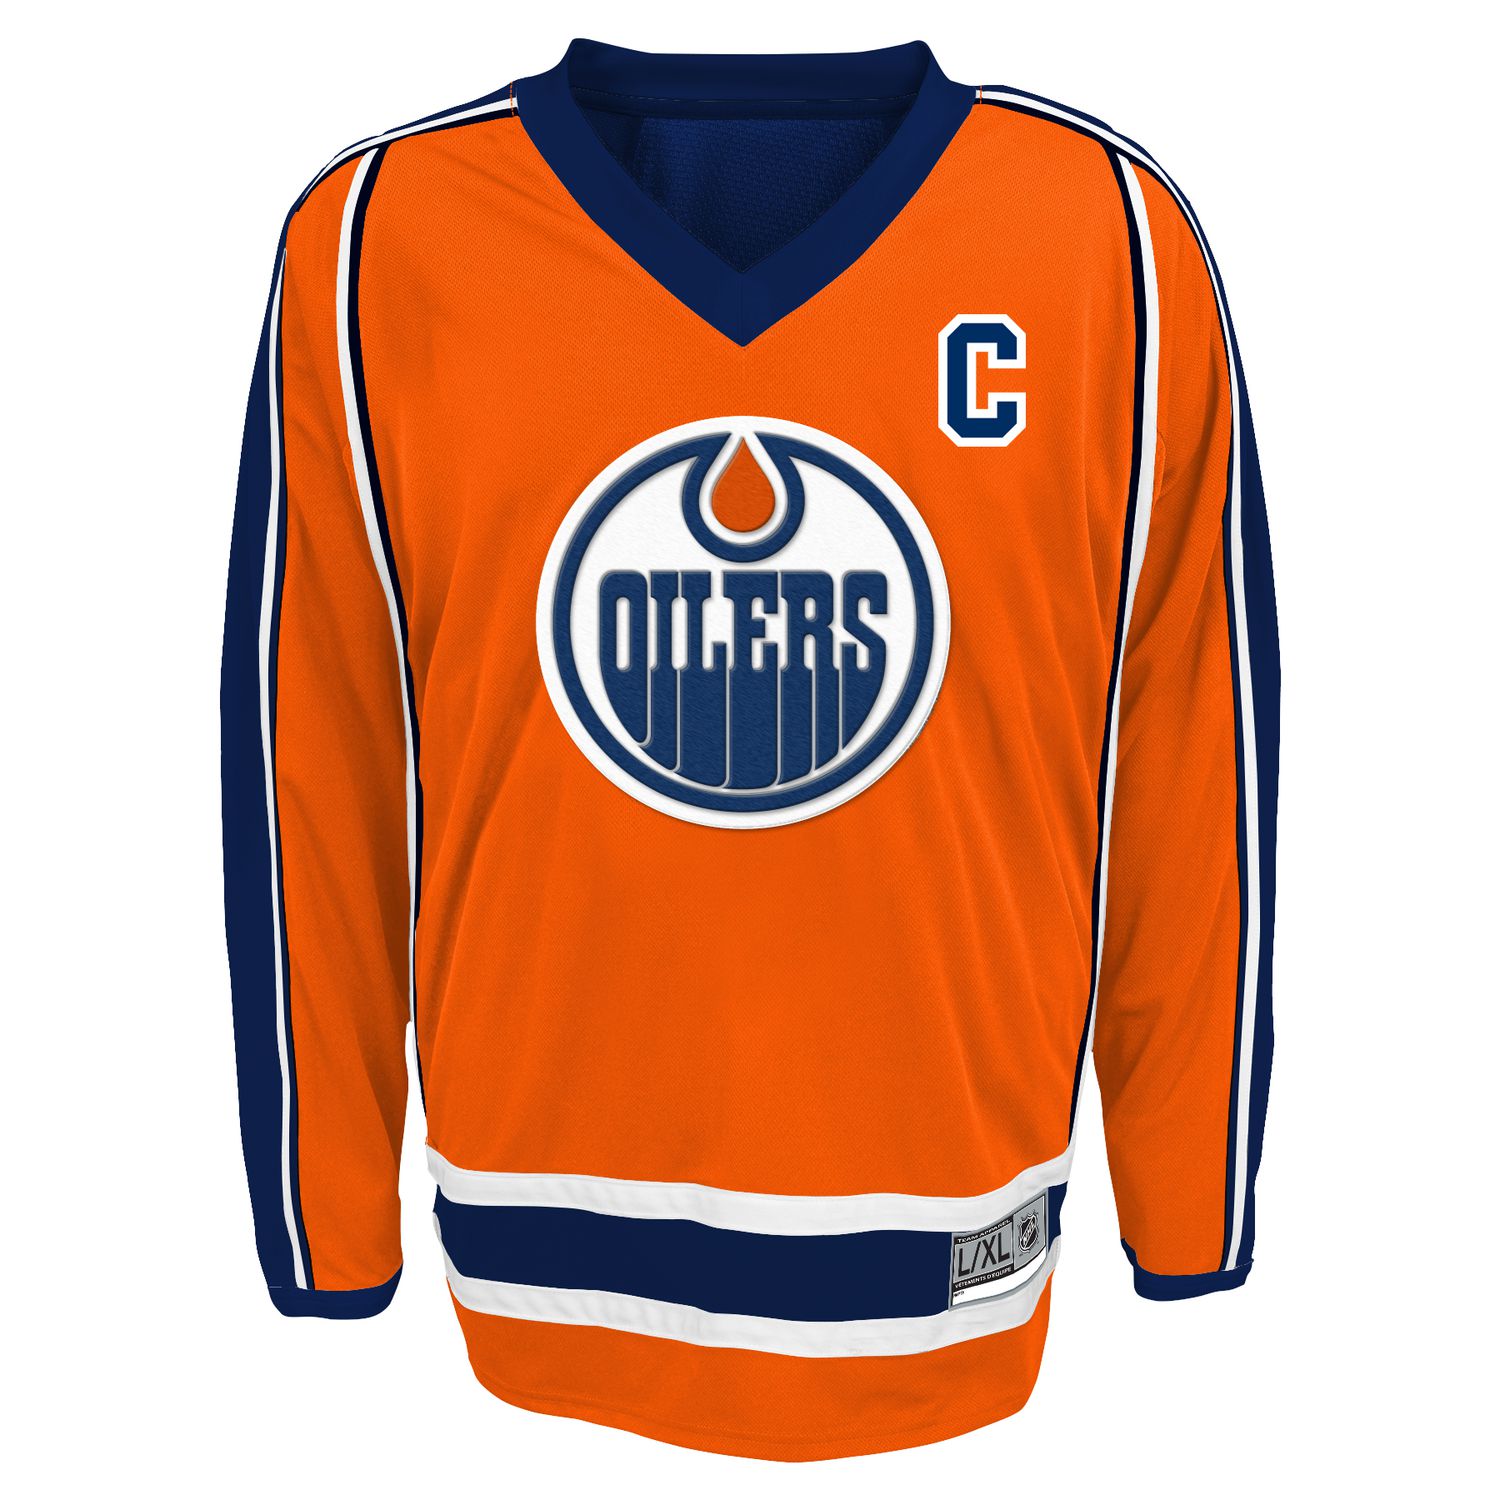 NHL Edmonton Oilers Youth Player Jersey 